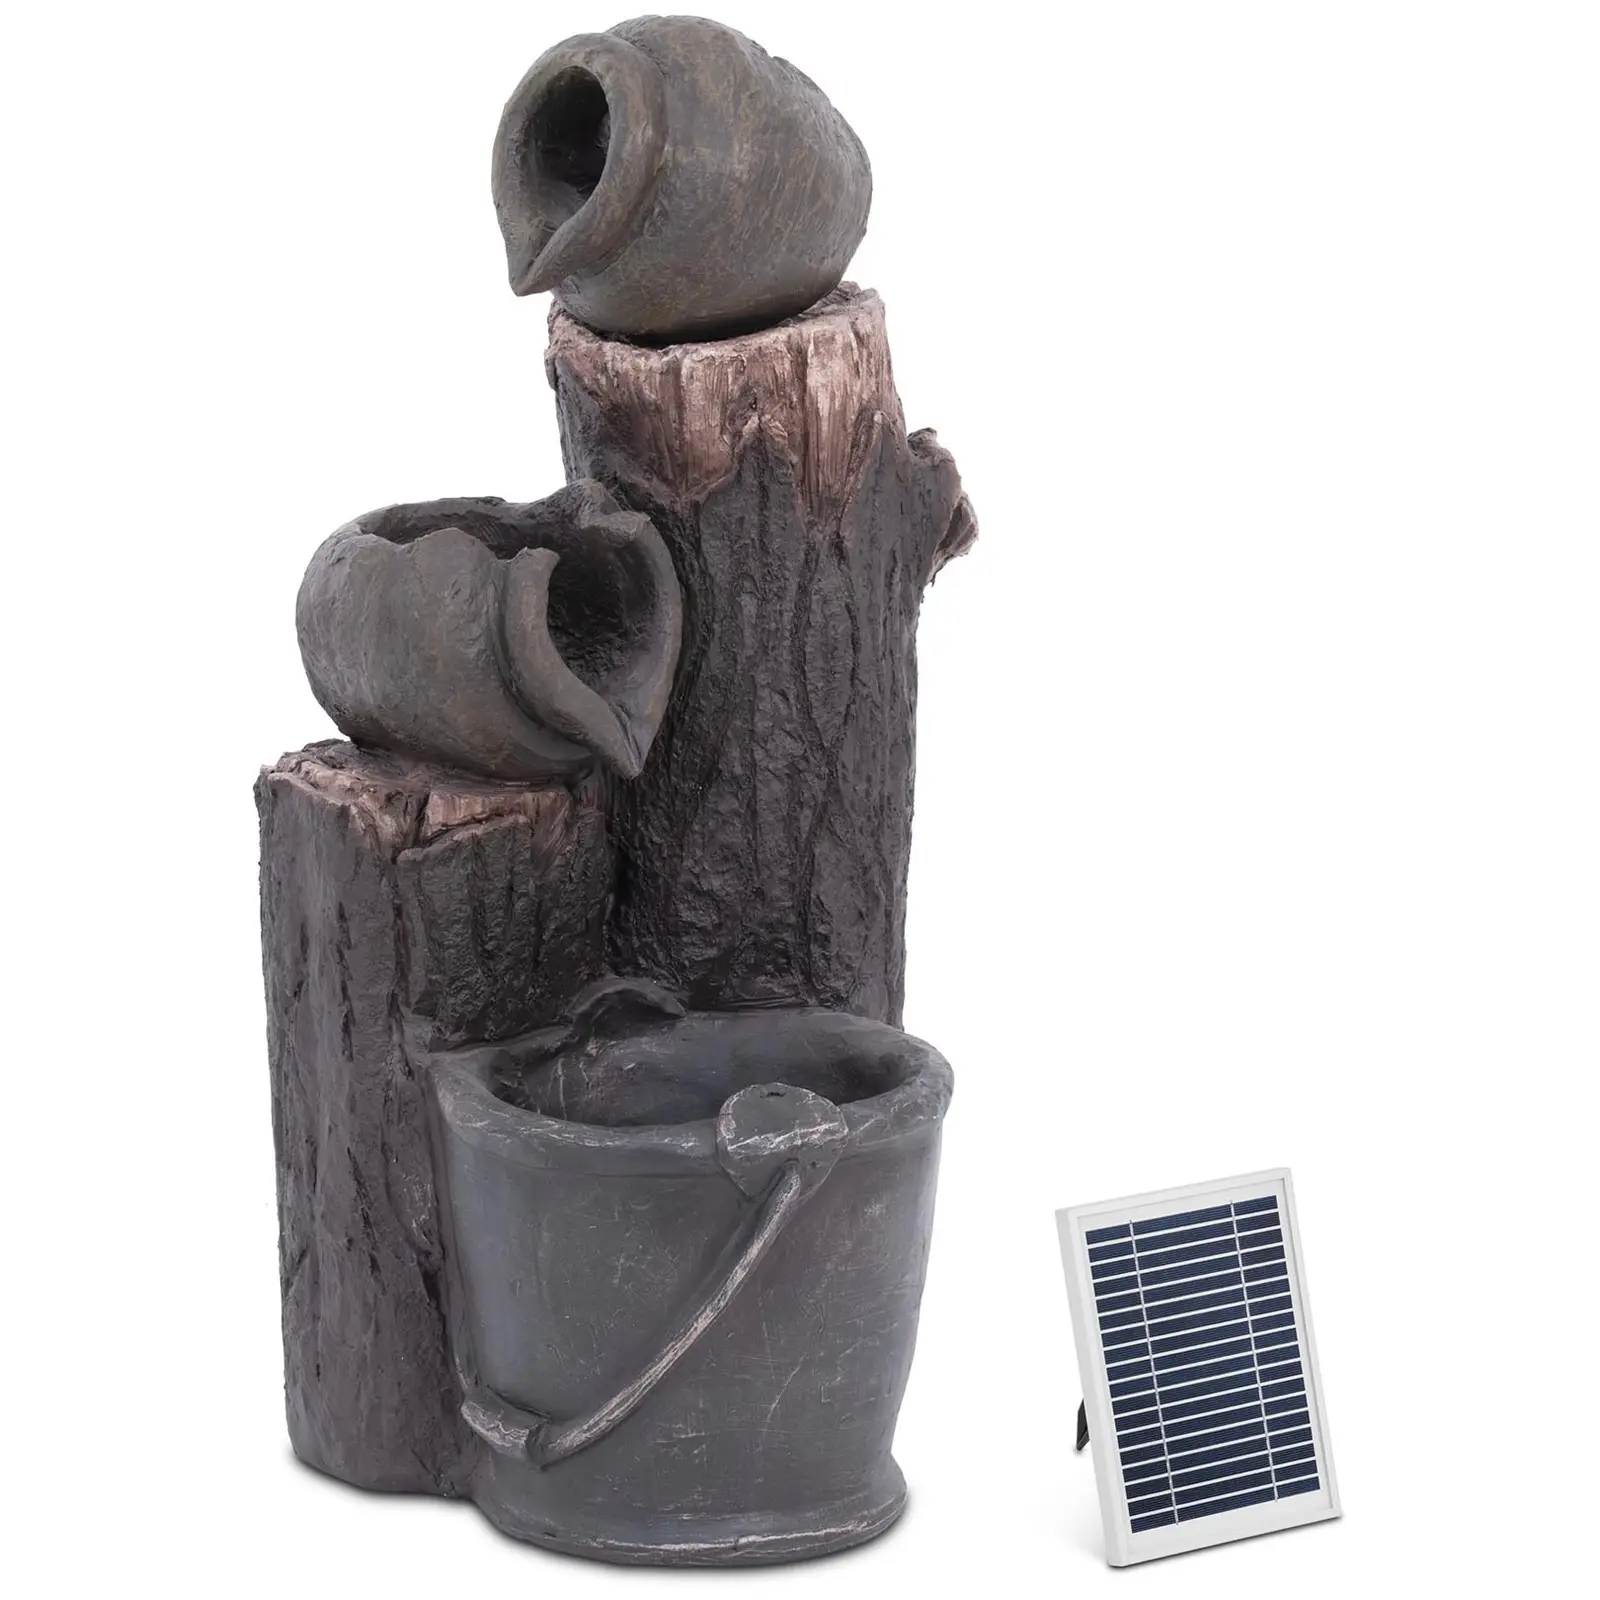 Solar Water Fountain - 2 vessels with bucket - LED lighting